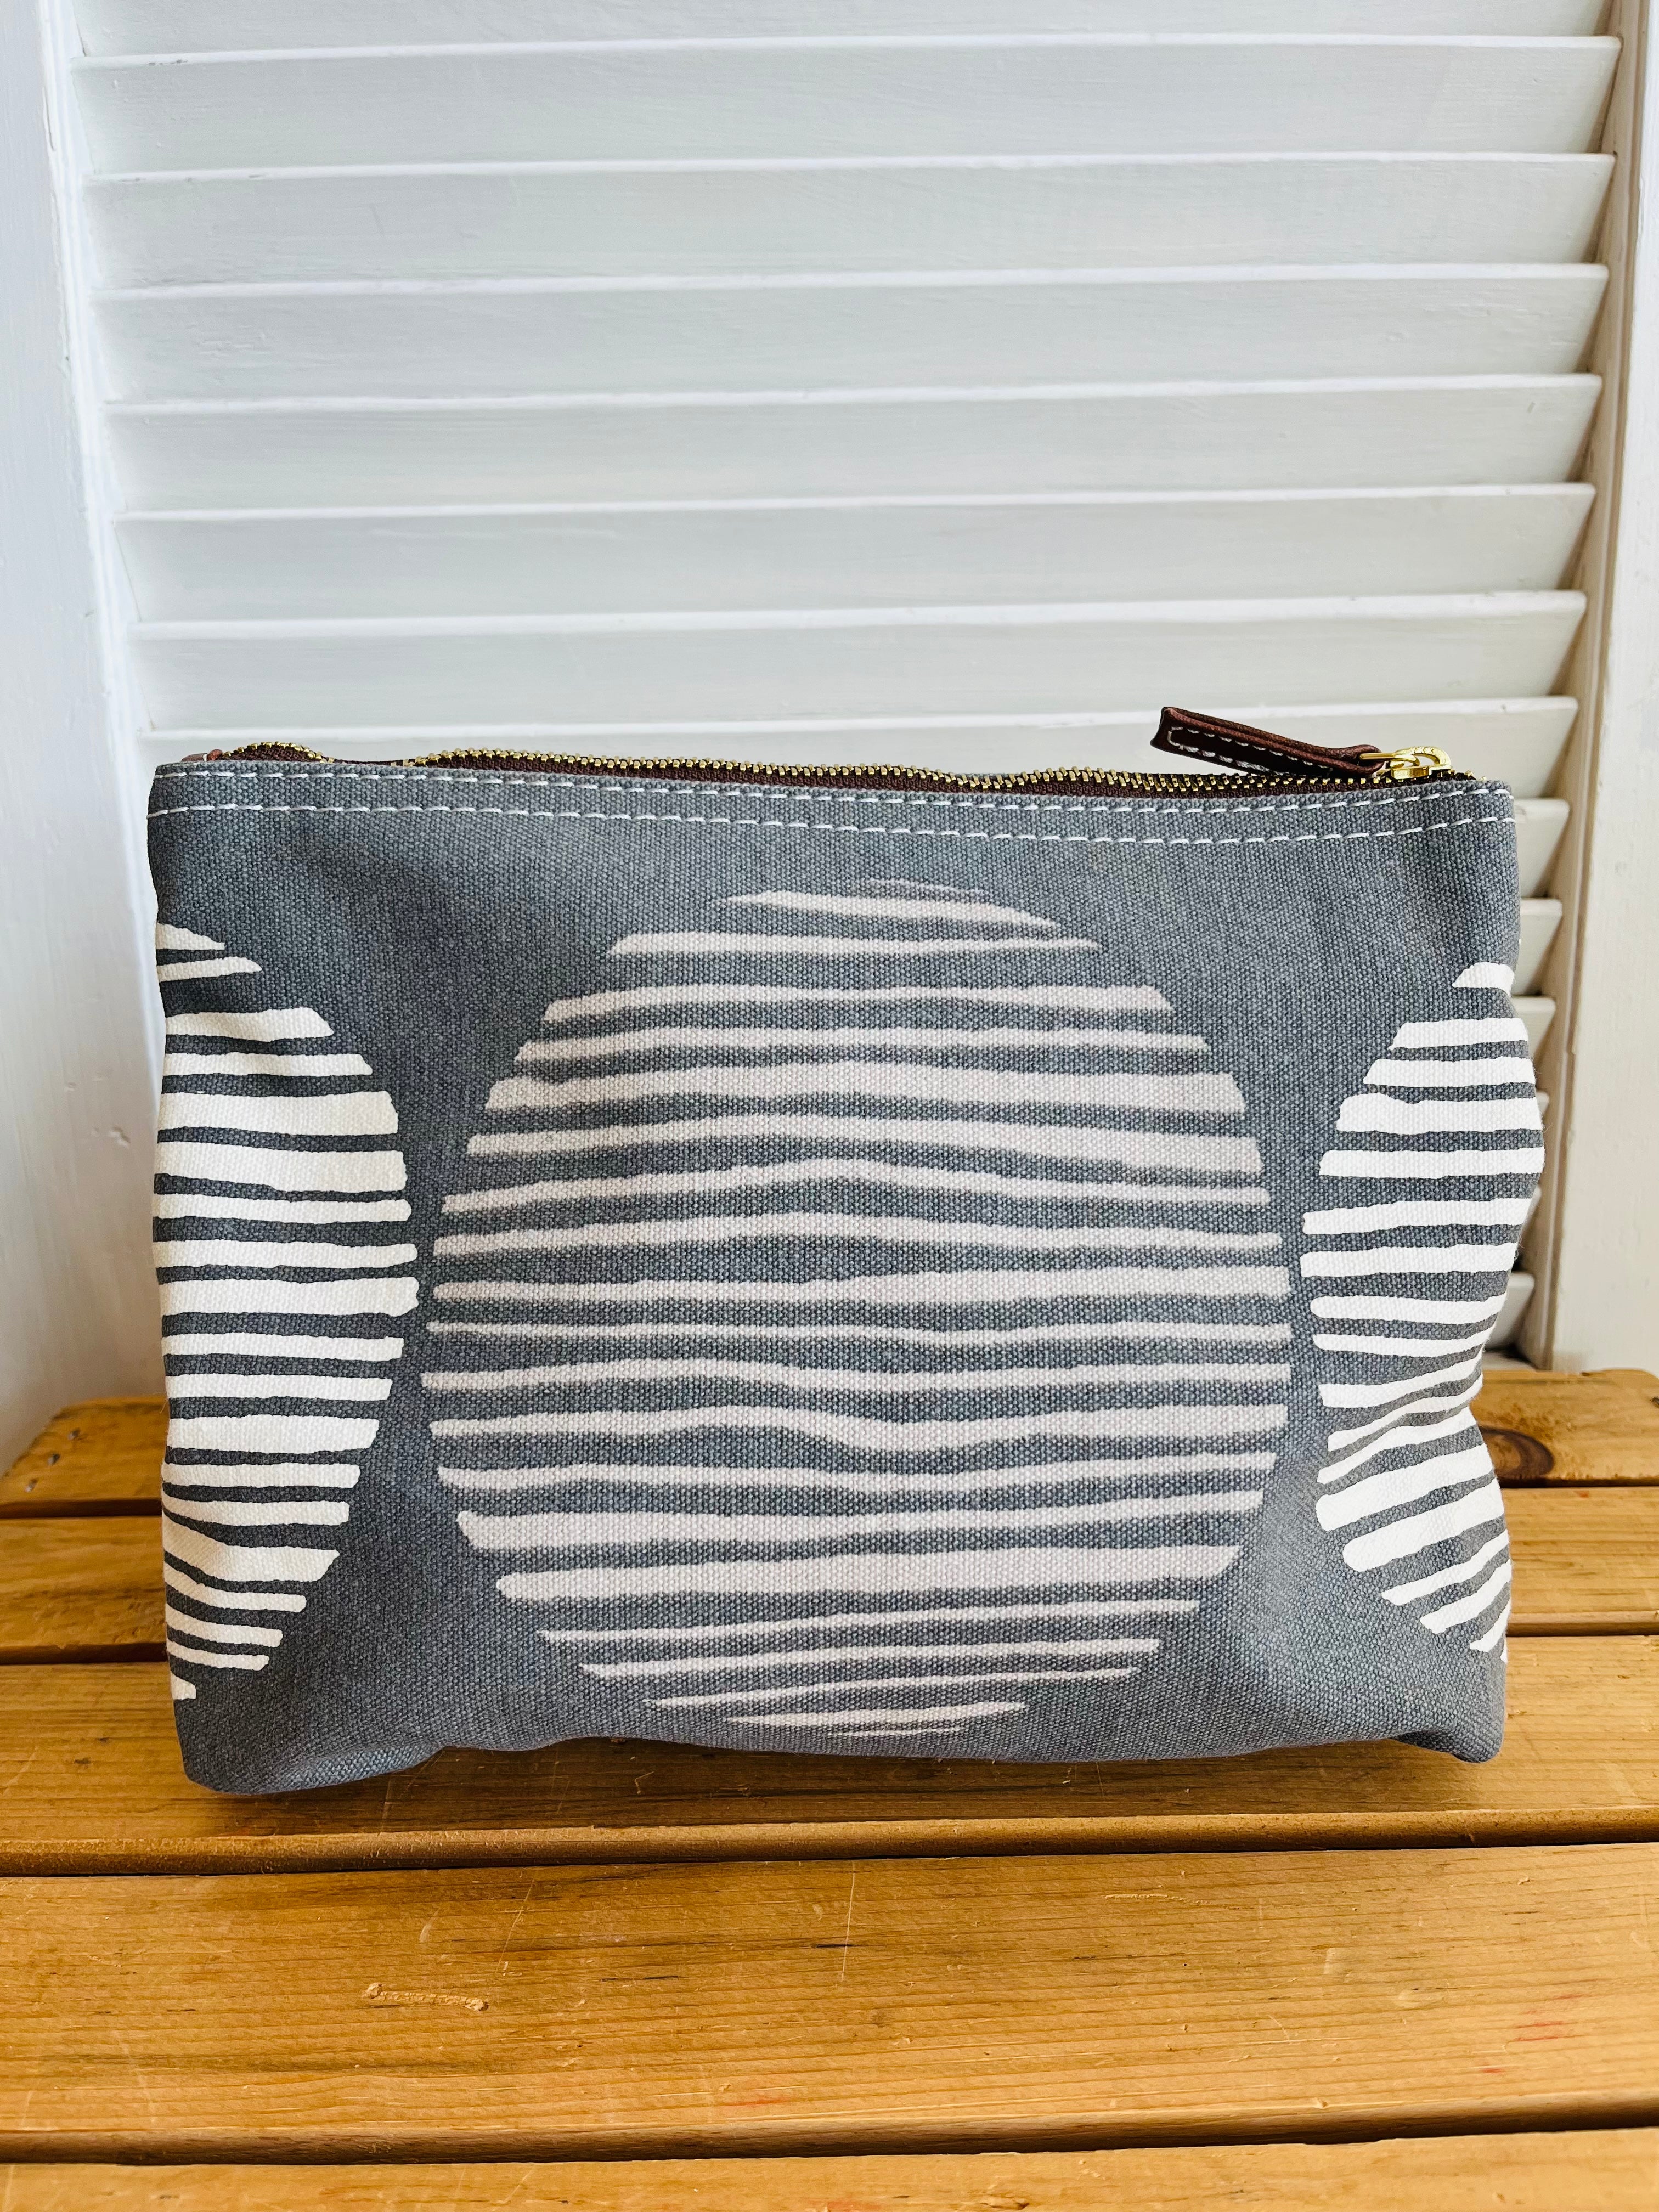 Big Sur - large zipper pouch from Maika